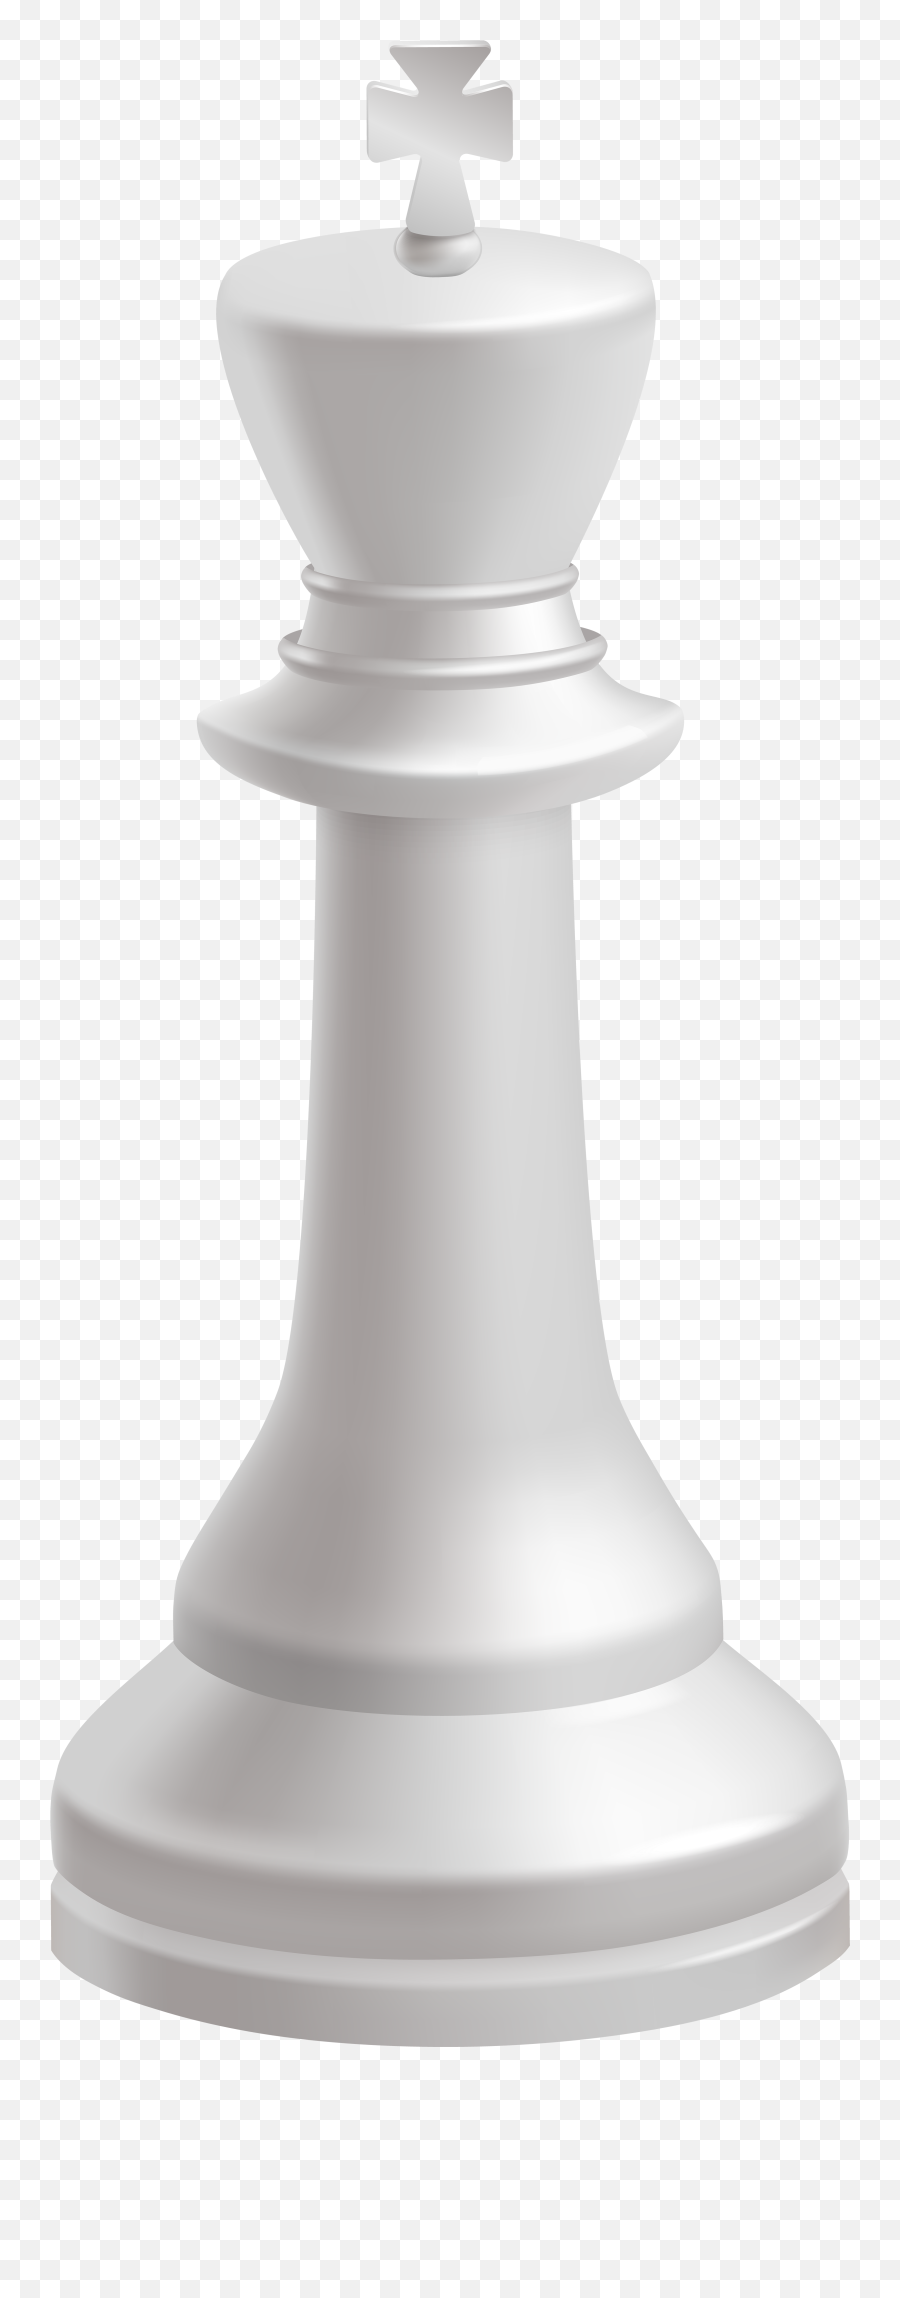 King White Chess Piece Png Clip Art - Solid Emoji,Chess Piece Clipart